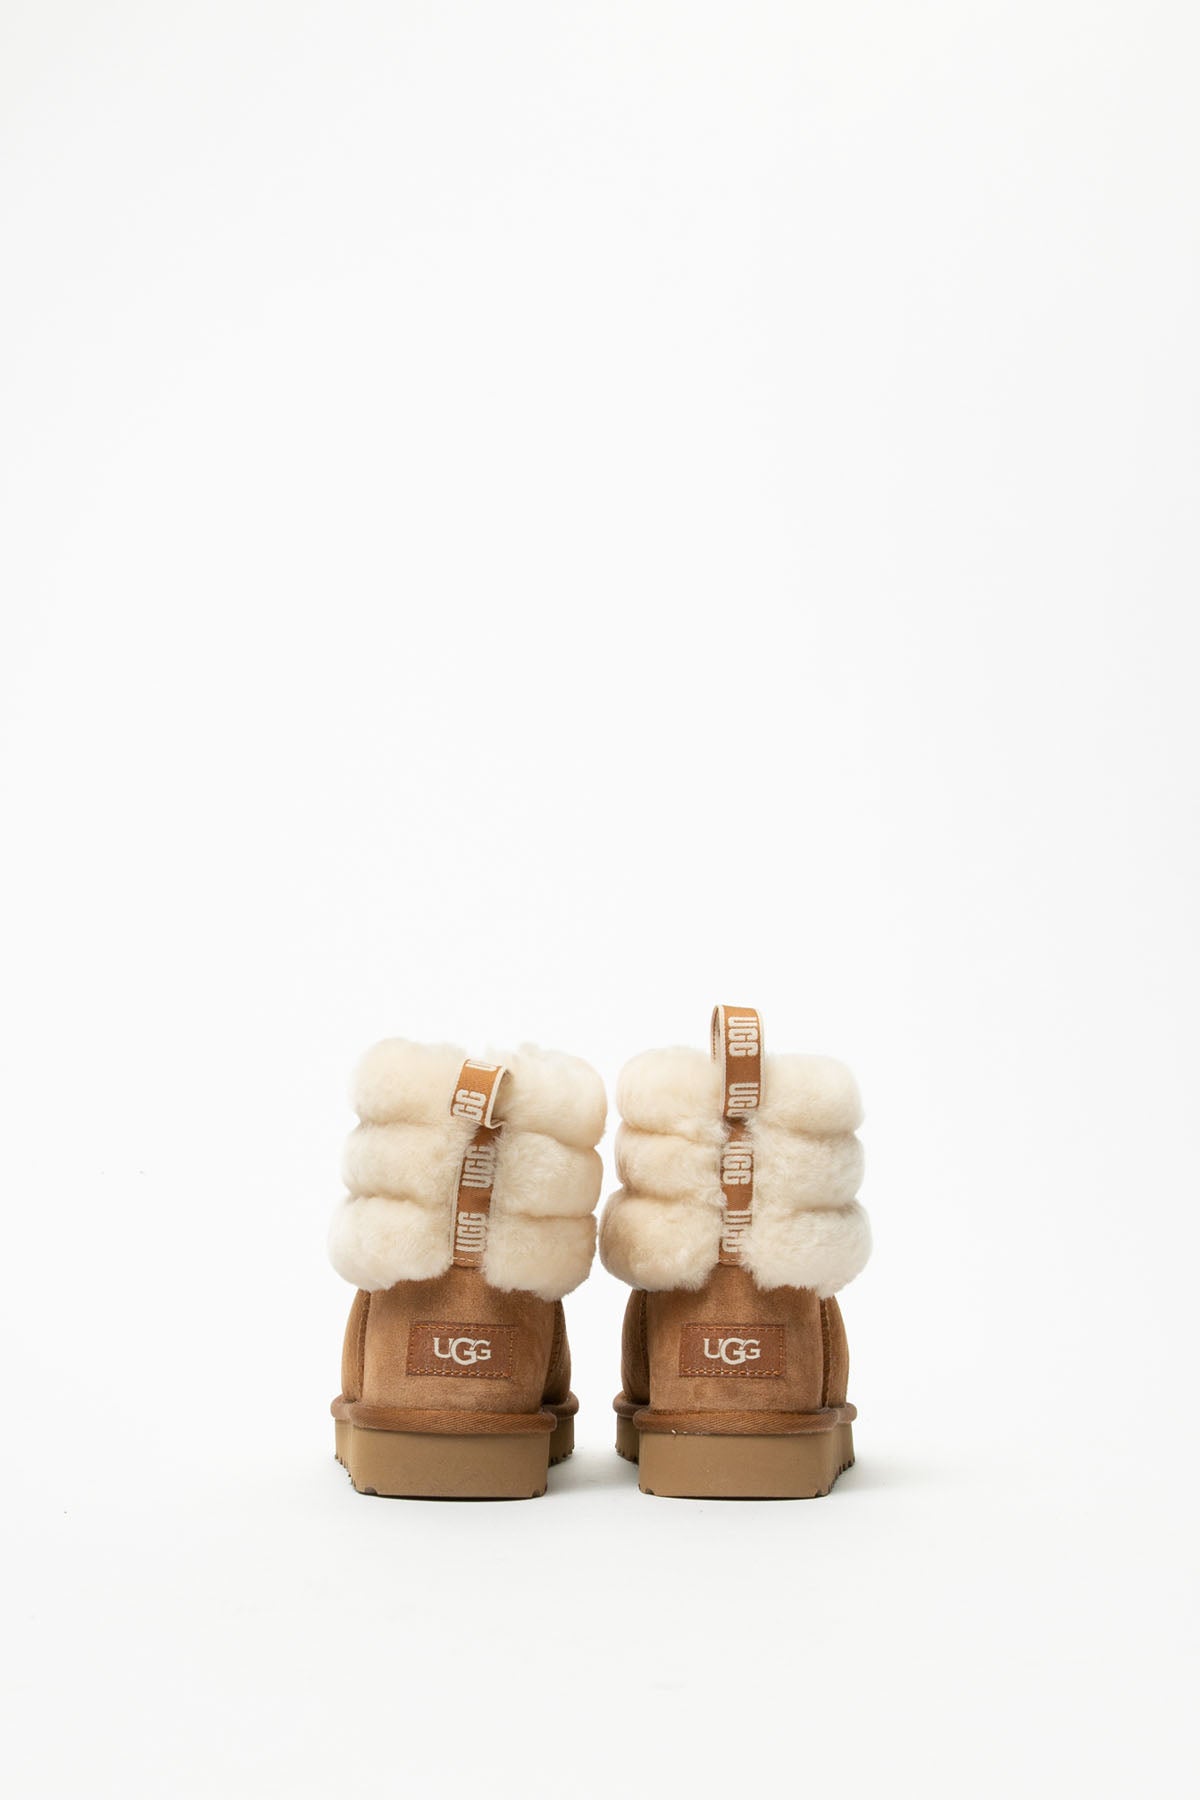 ugg fluff mini quilted noir